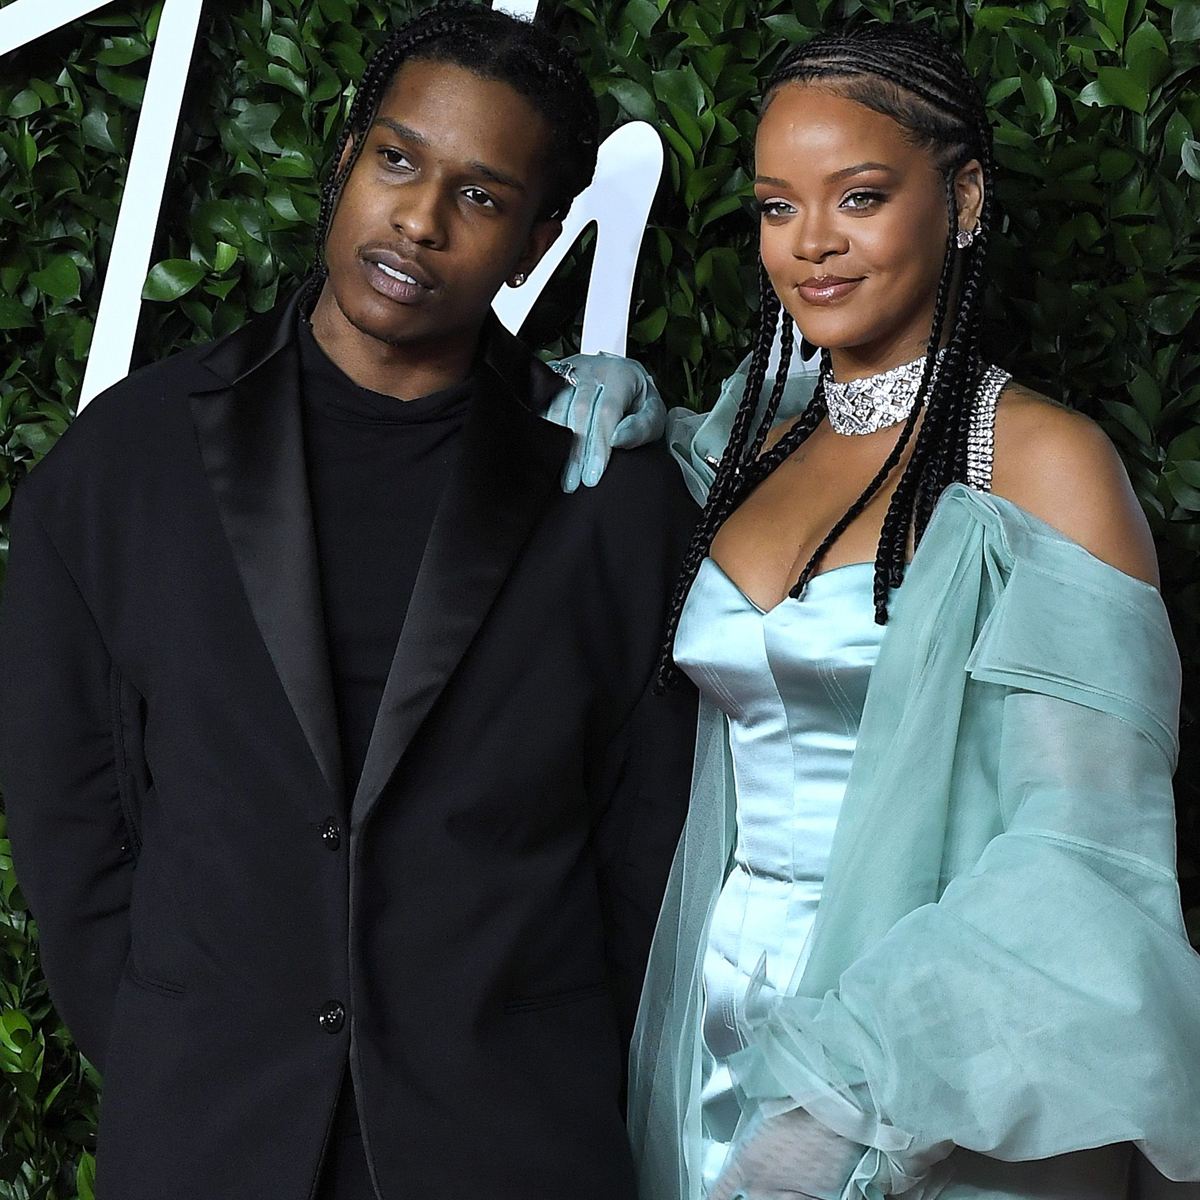 Rihanna Wears Green Skirt With ASAP Rocky On Date Night – Hollywood Life